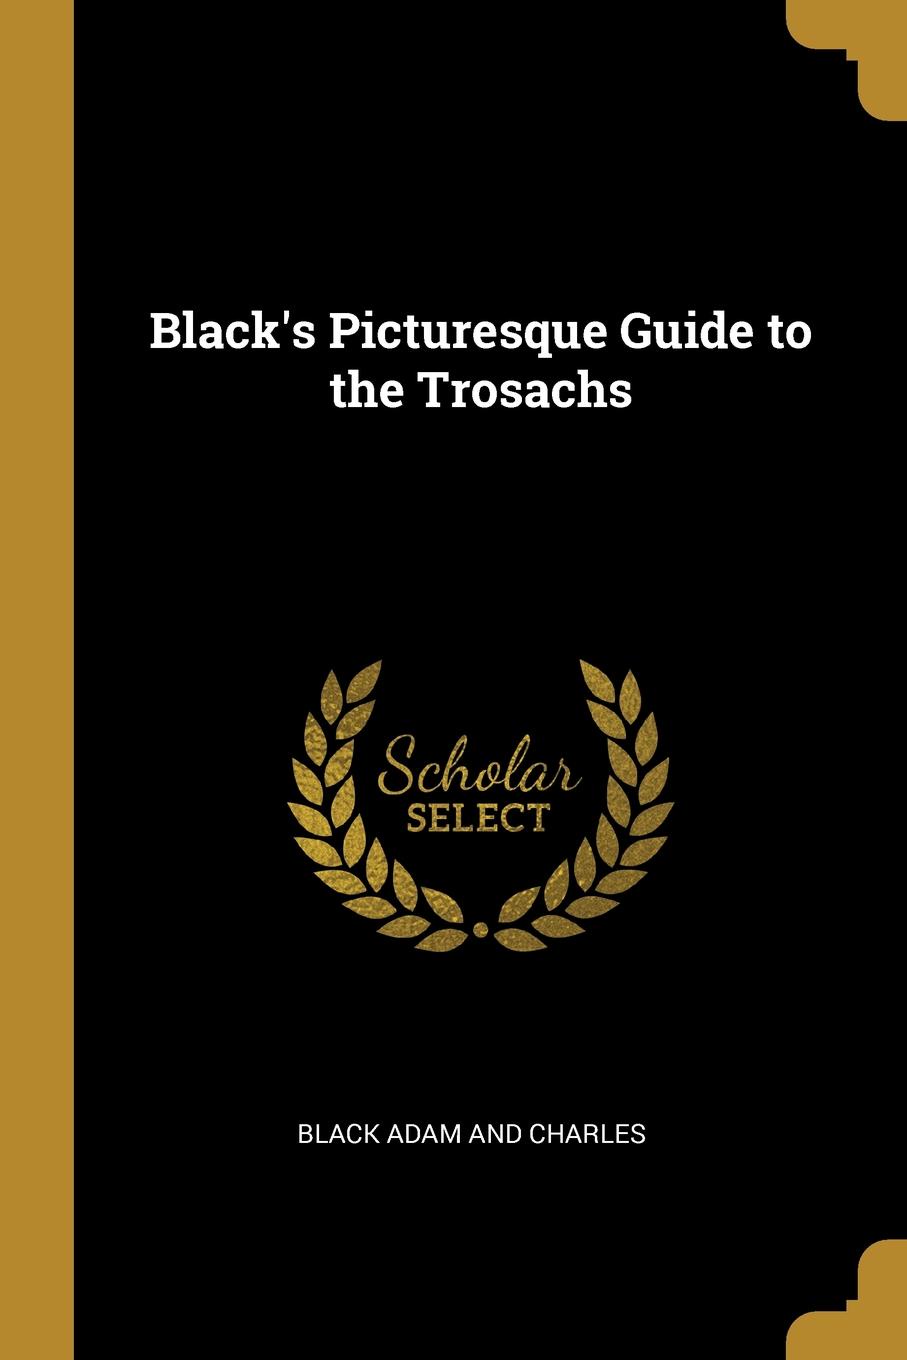 Black.s Picturesque Guide to the Trosachs